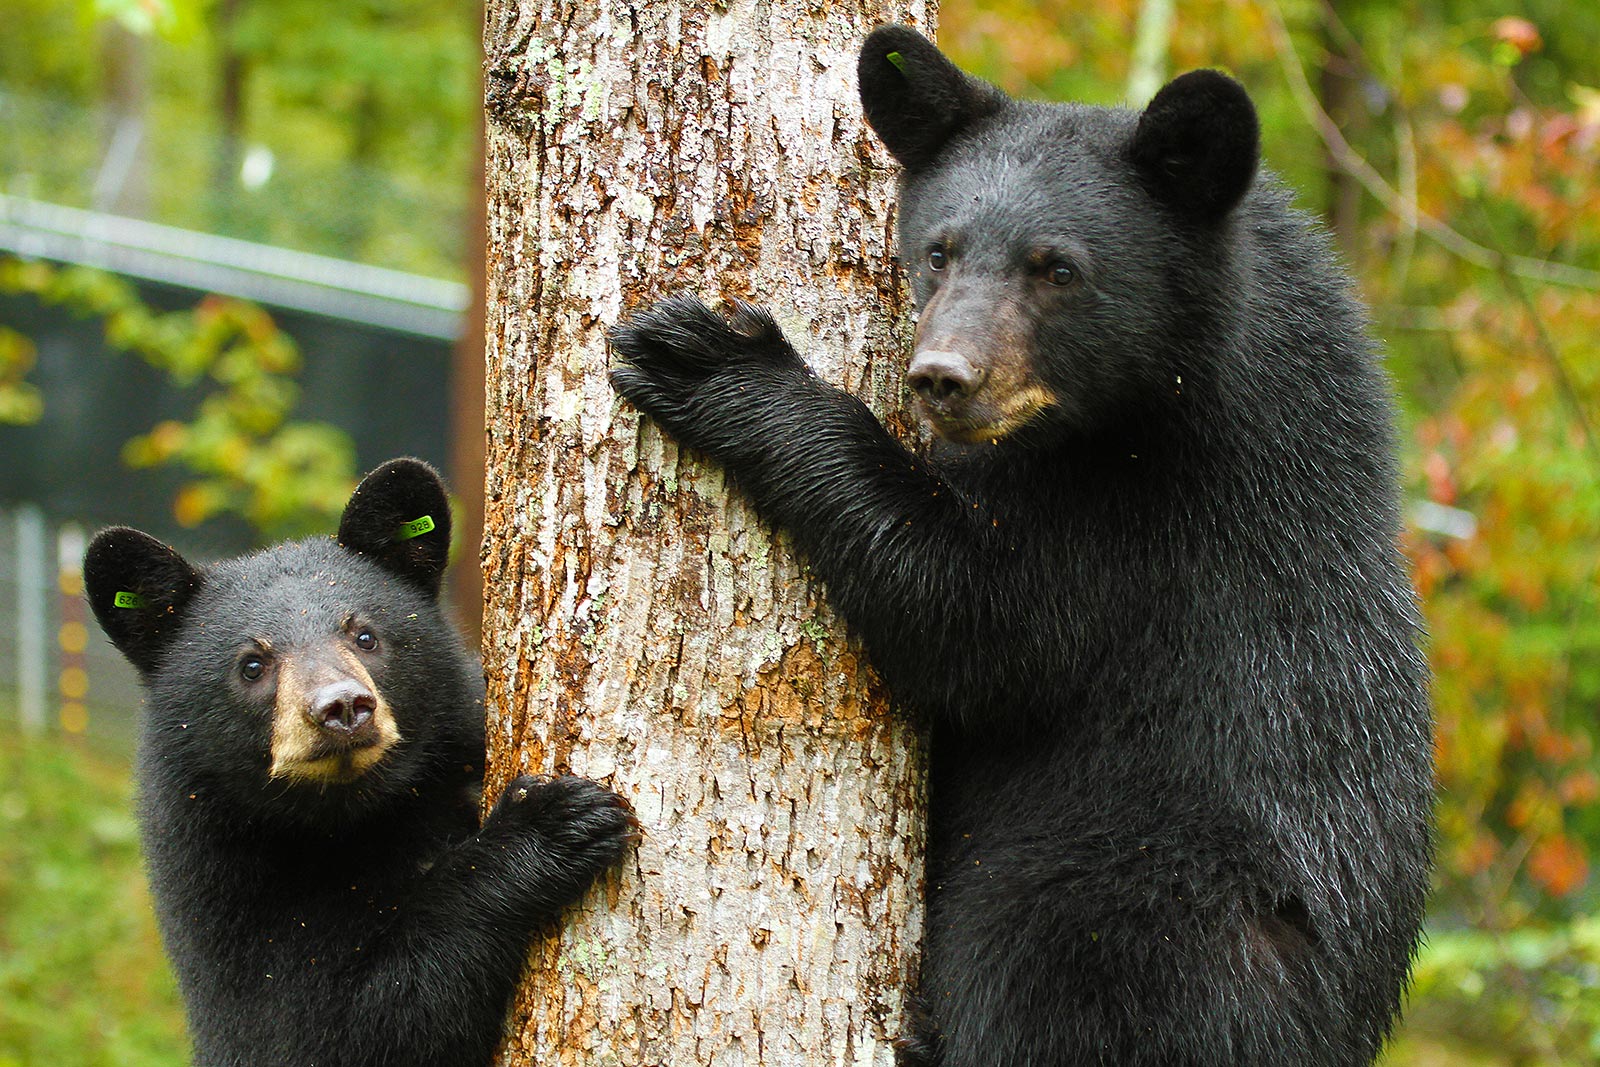 The Bear Necessities: Why Our Forests Need Bears - Nature Canada